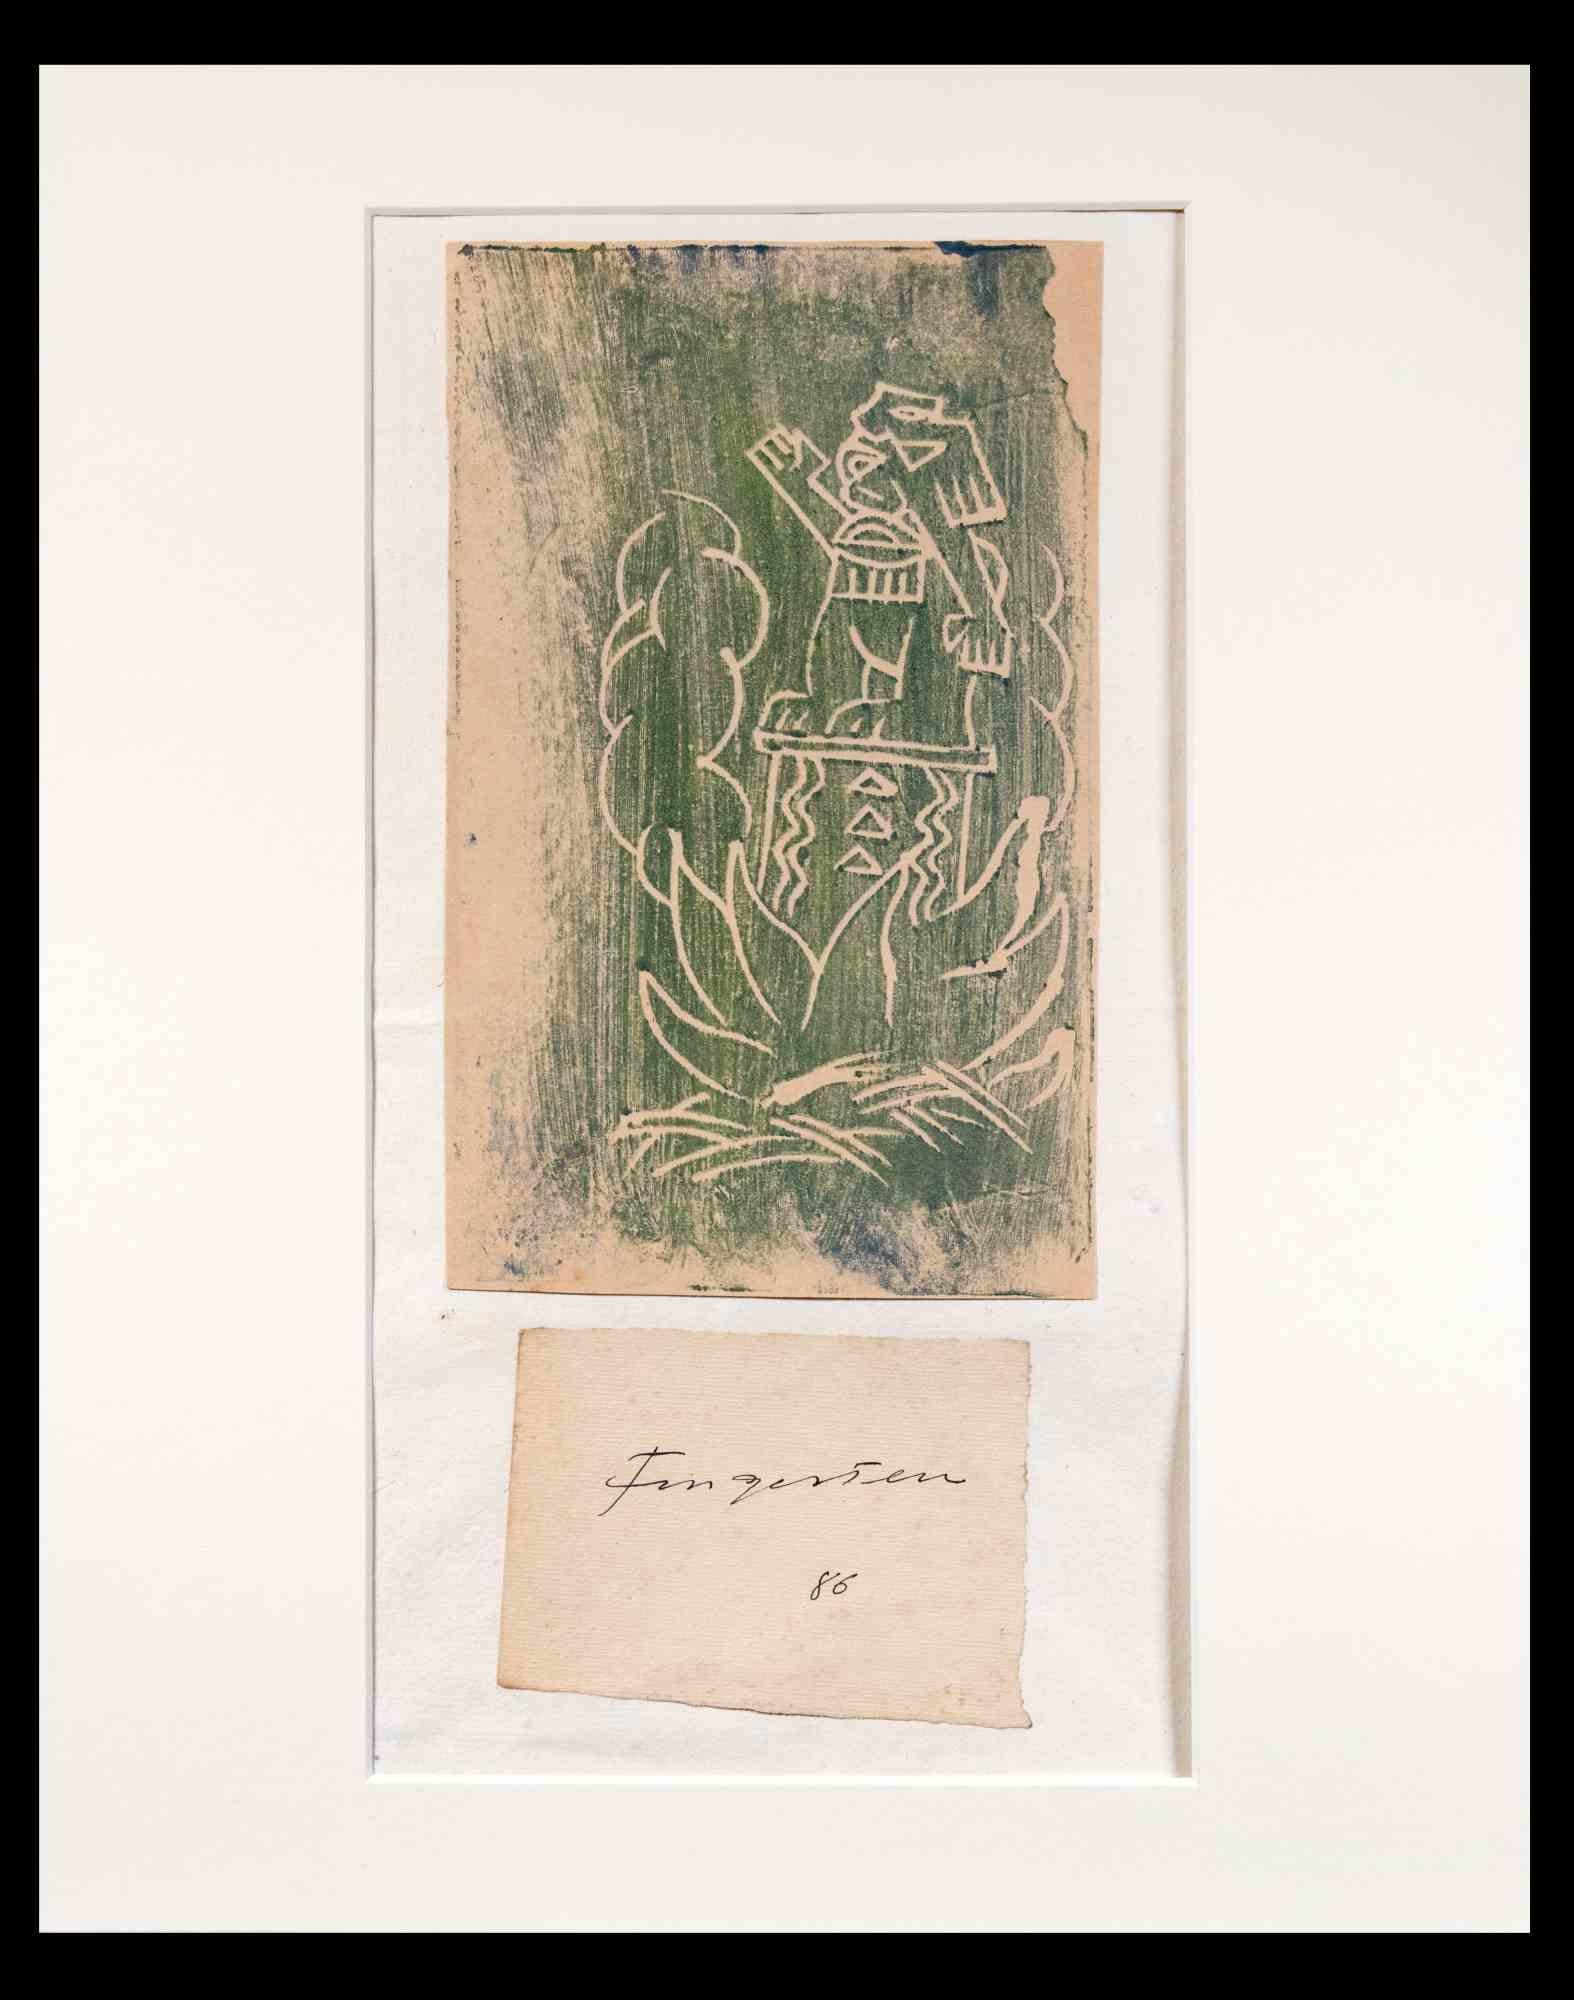 Man in pot  is a woodcut print realized by Michel Fingesten in 1930s. 

Above the woodcut representing a man with one hand raised and fire; underneath a card with the engraver's signature and the number 86. 

30x24 cm ; it includes passpartout.